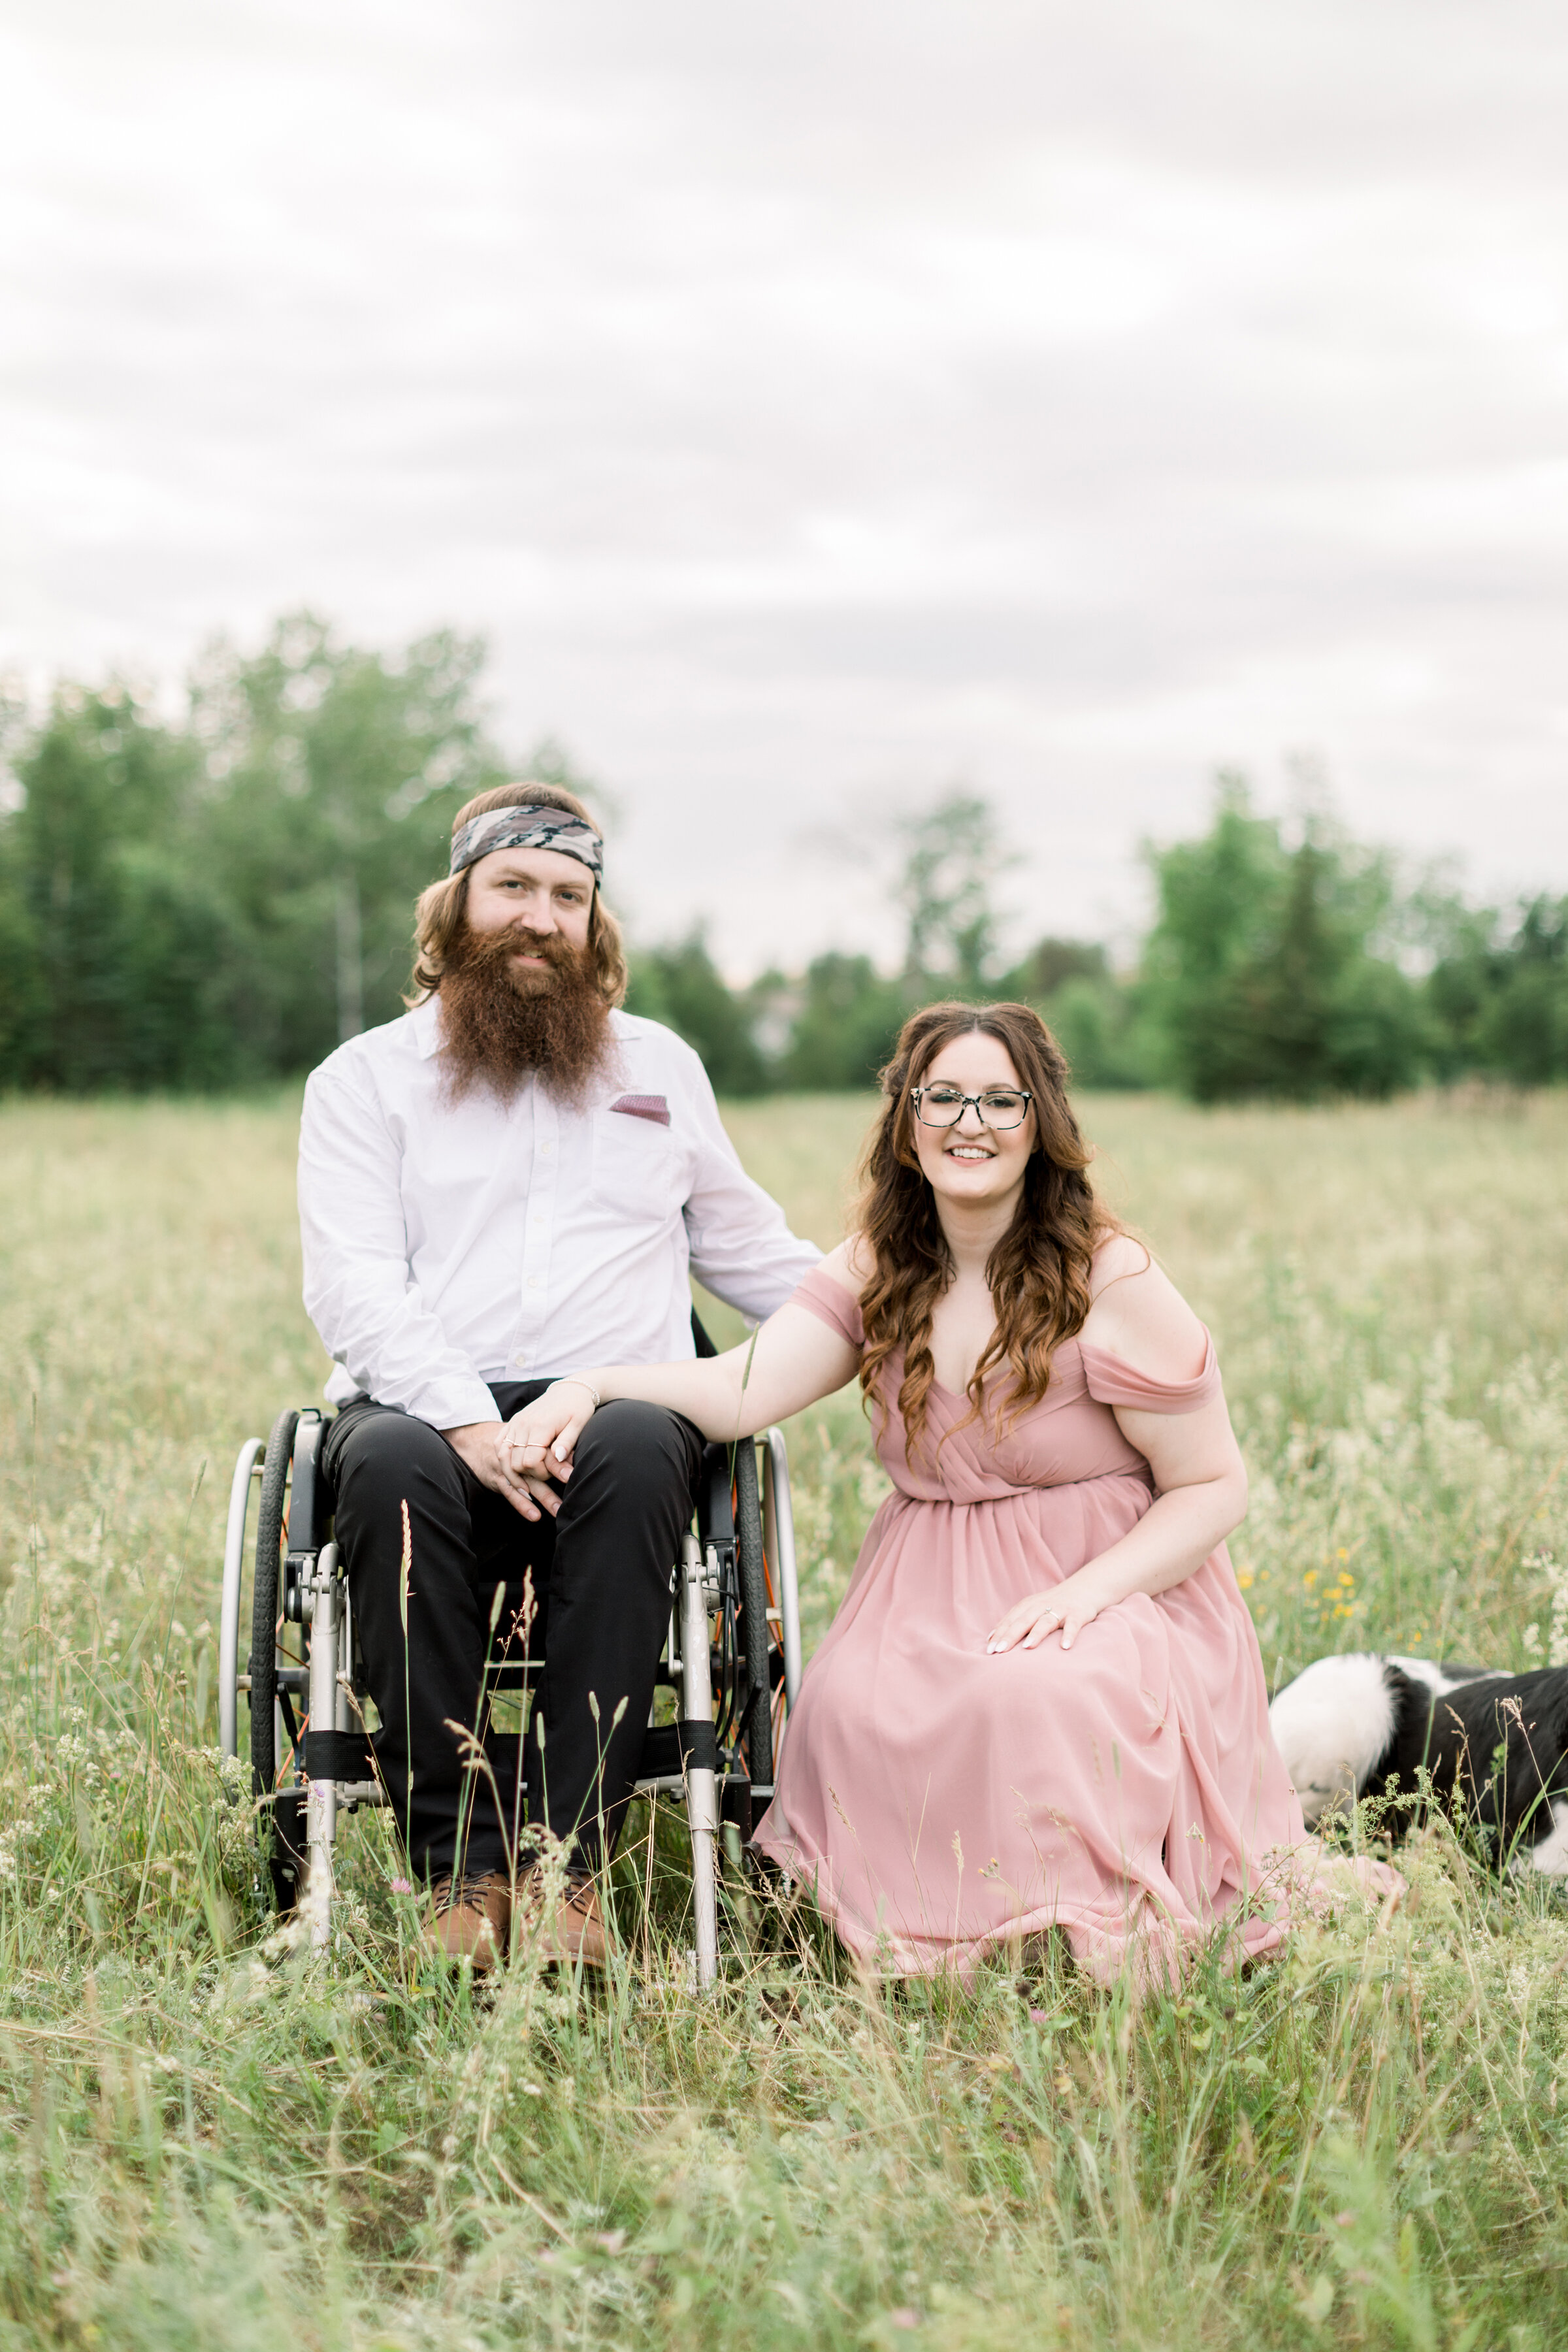  A couple sit together in a beautiful grassy field on a cloudy day in a rustic styled engagement session in Smith Falls, Ontario by Chelsea Mason Photography. Client attire inspiration off the shoulder pink flowy dress inspiration men’s semi formal a